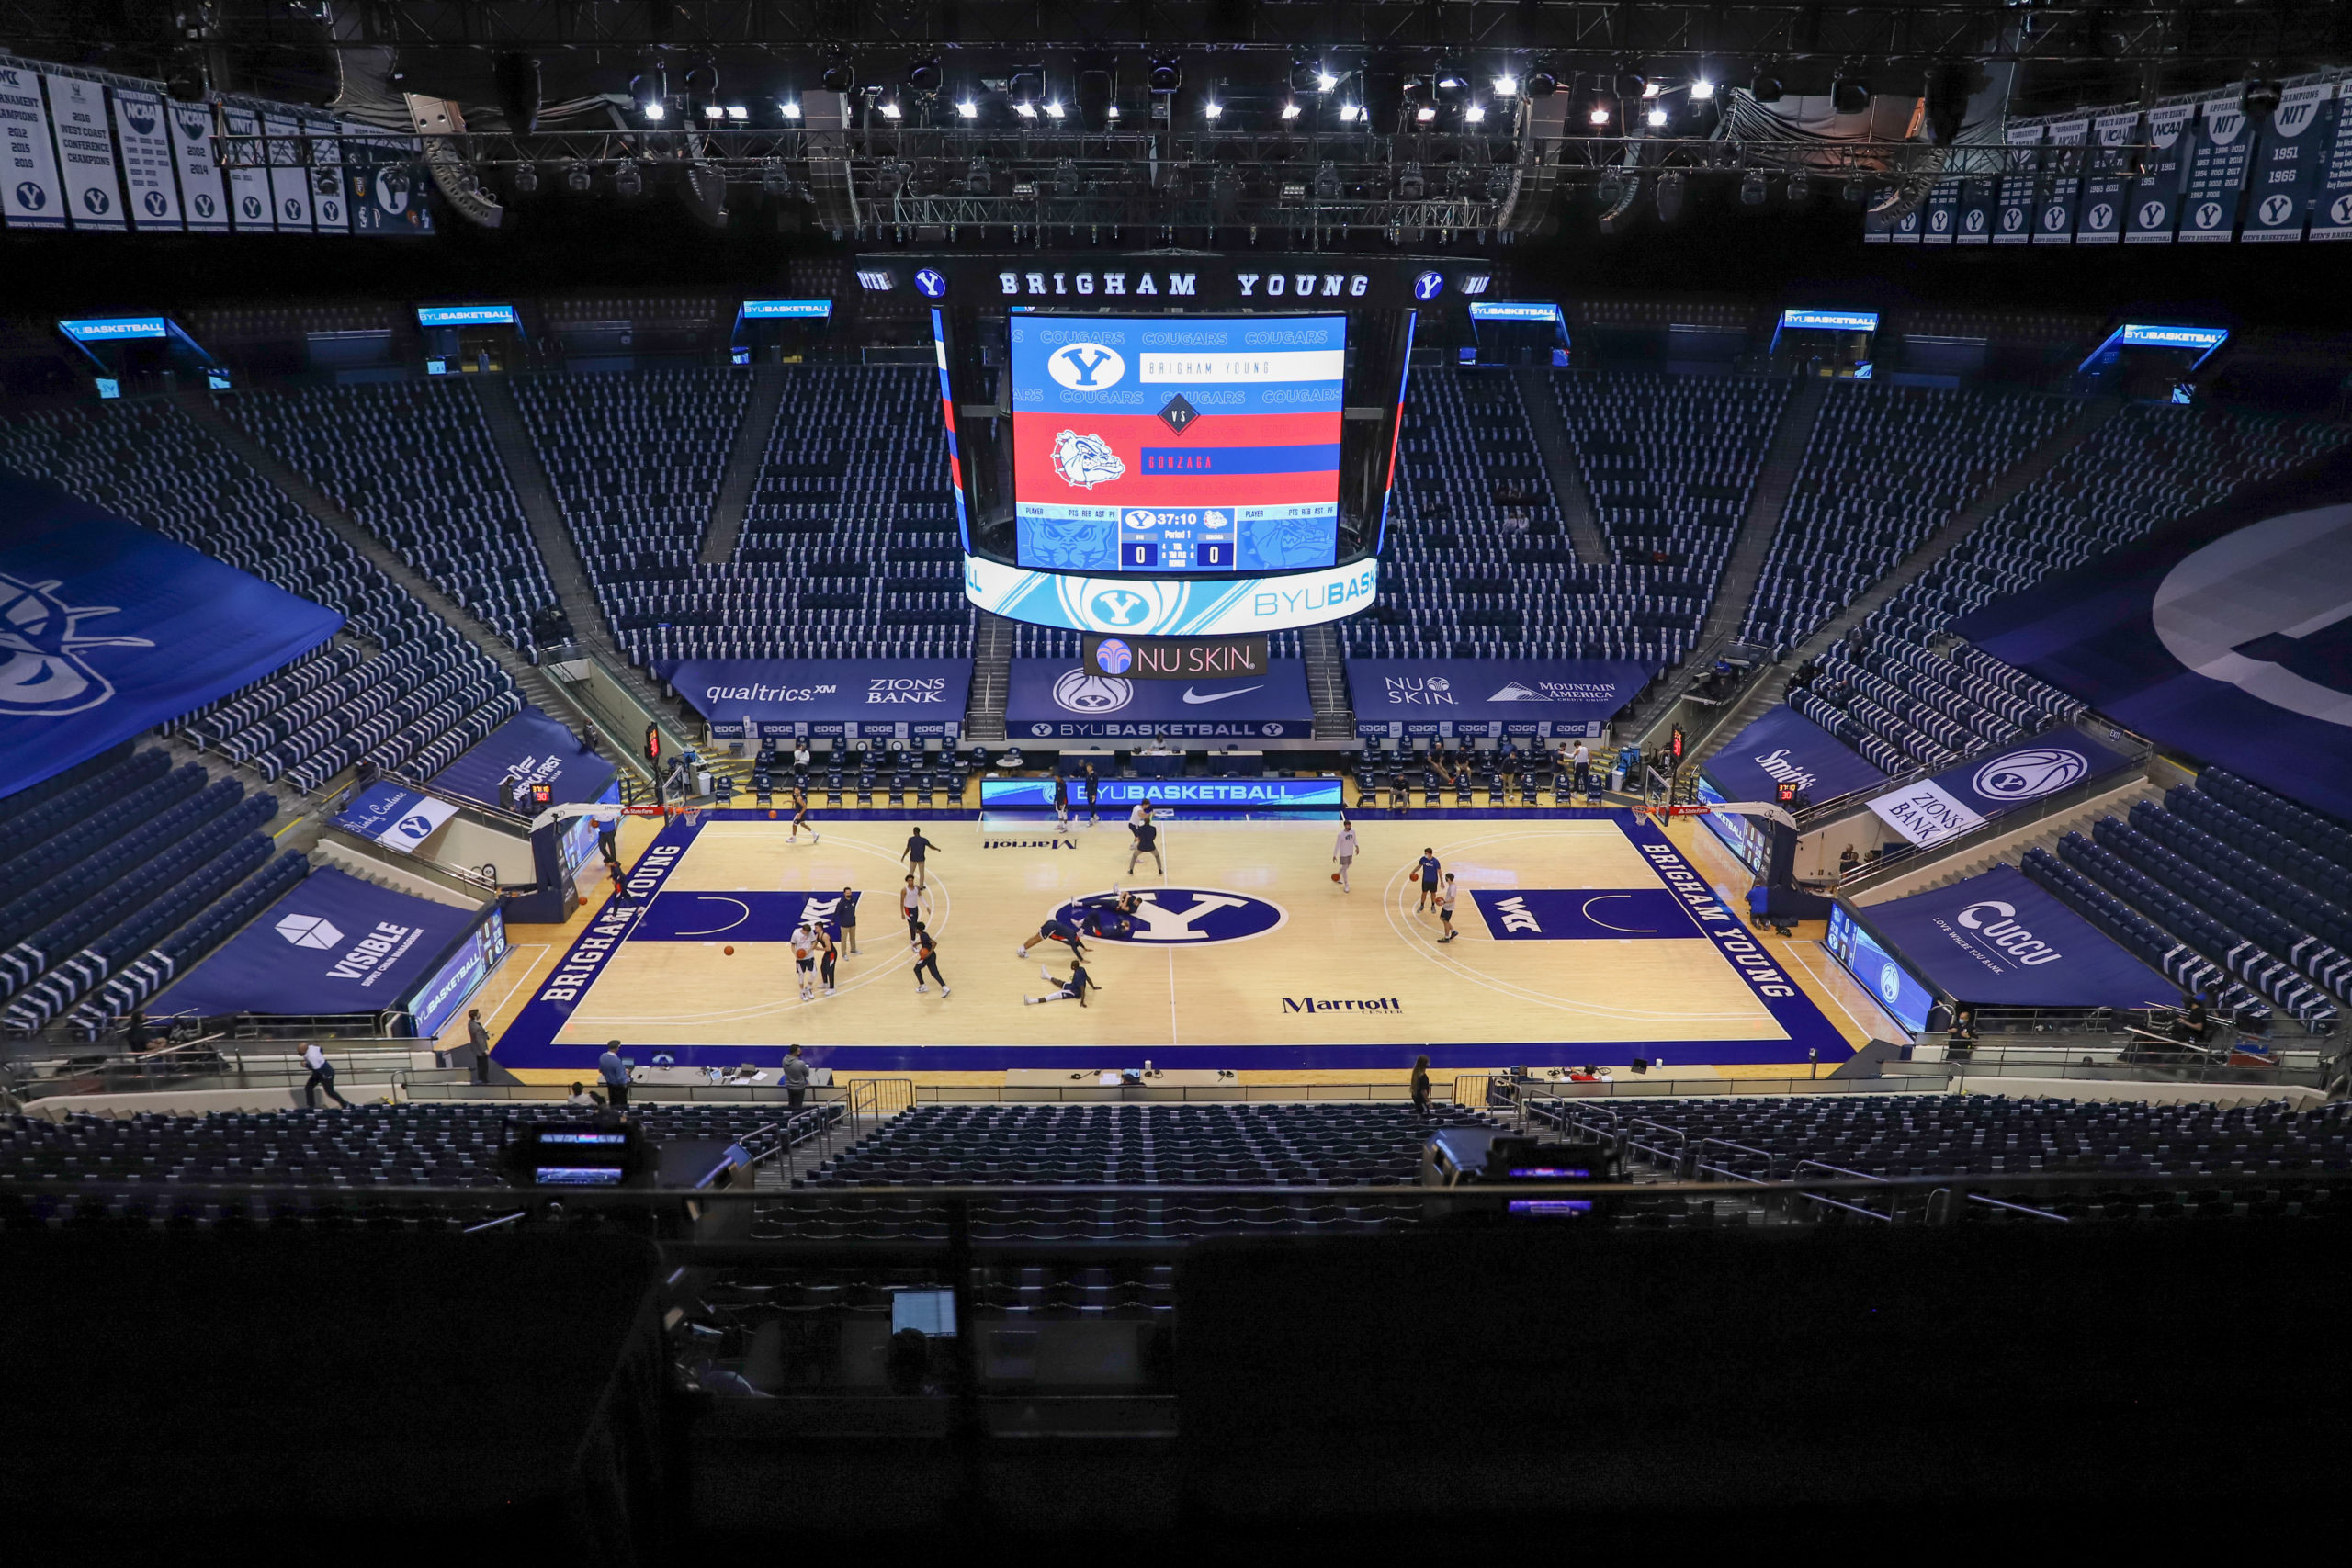 BYU men's basketball allowing fans at Marriott Center for first time